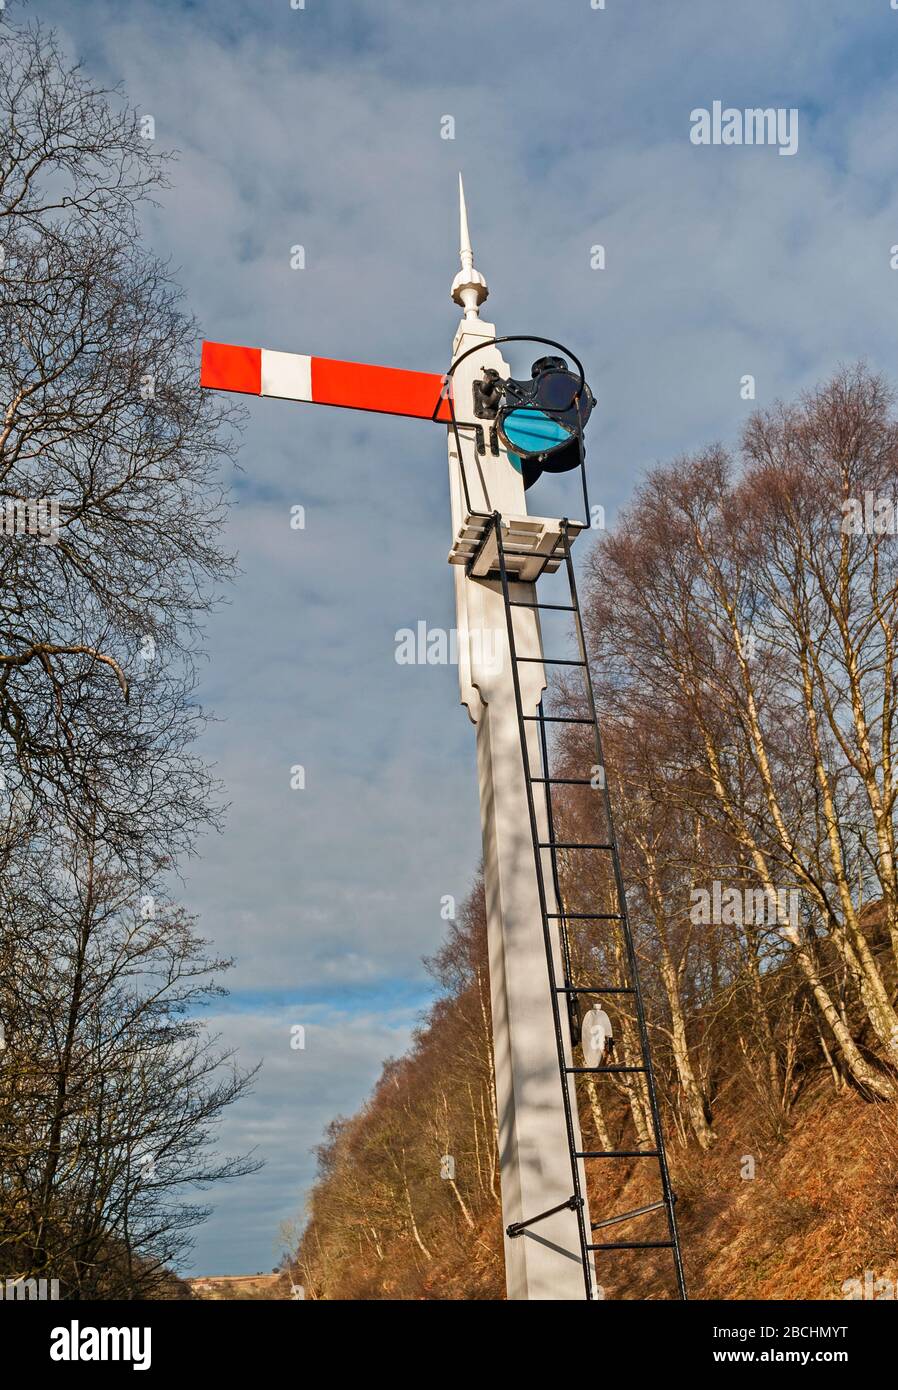 Old traditional railway signal at a points junction in the countryside Stock Photo